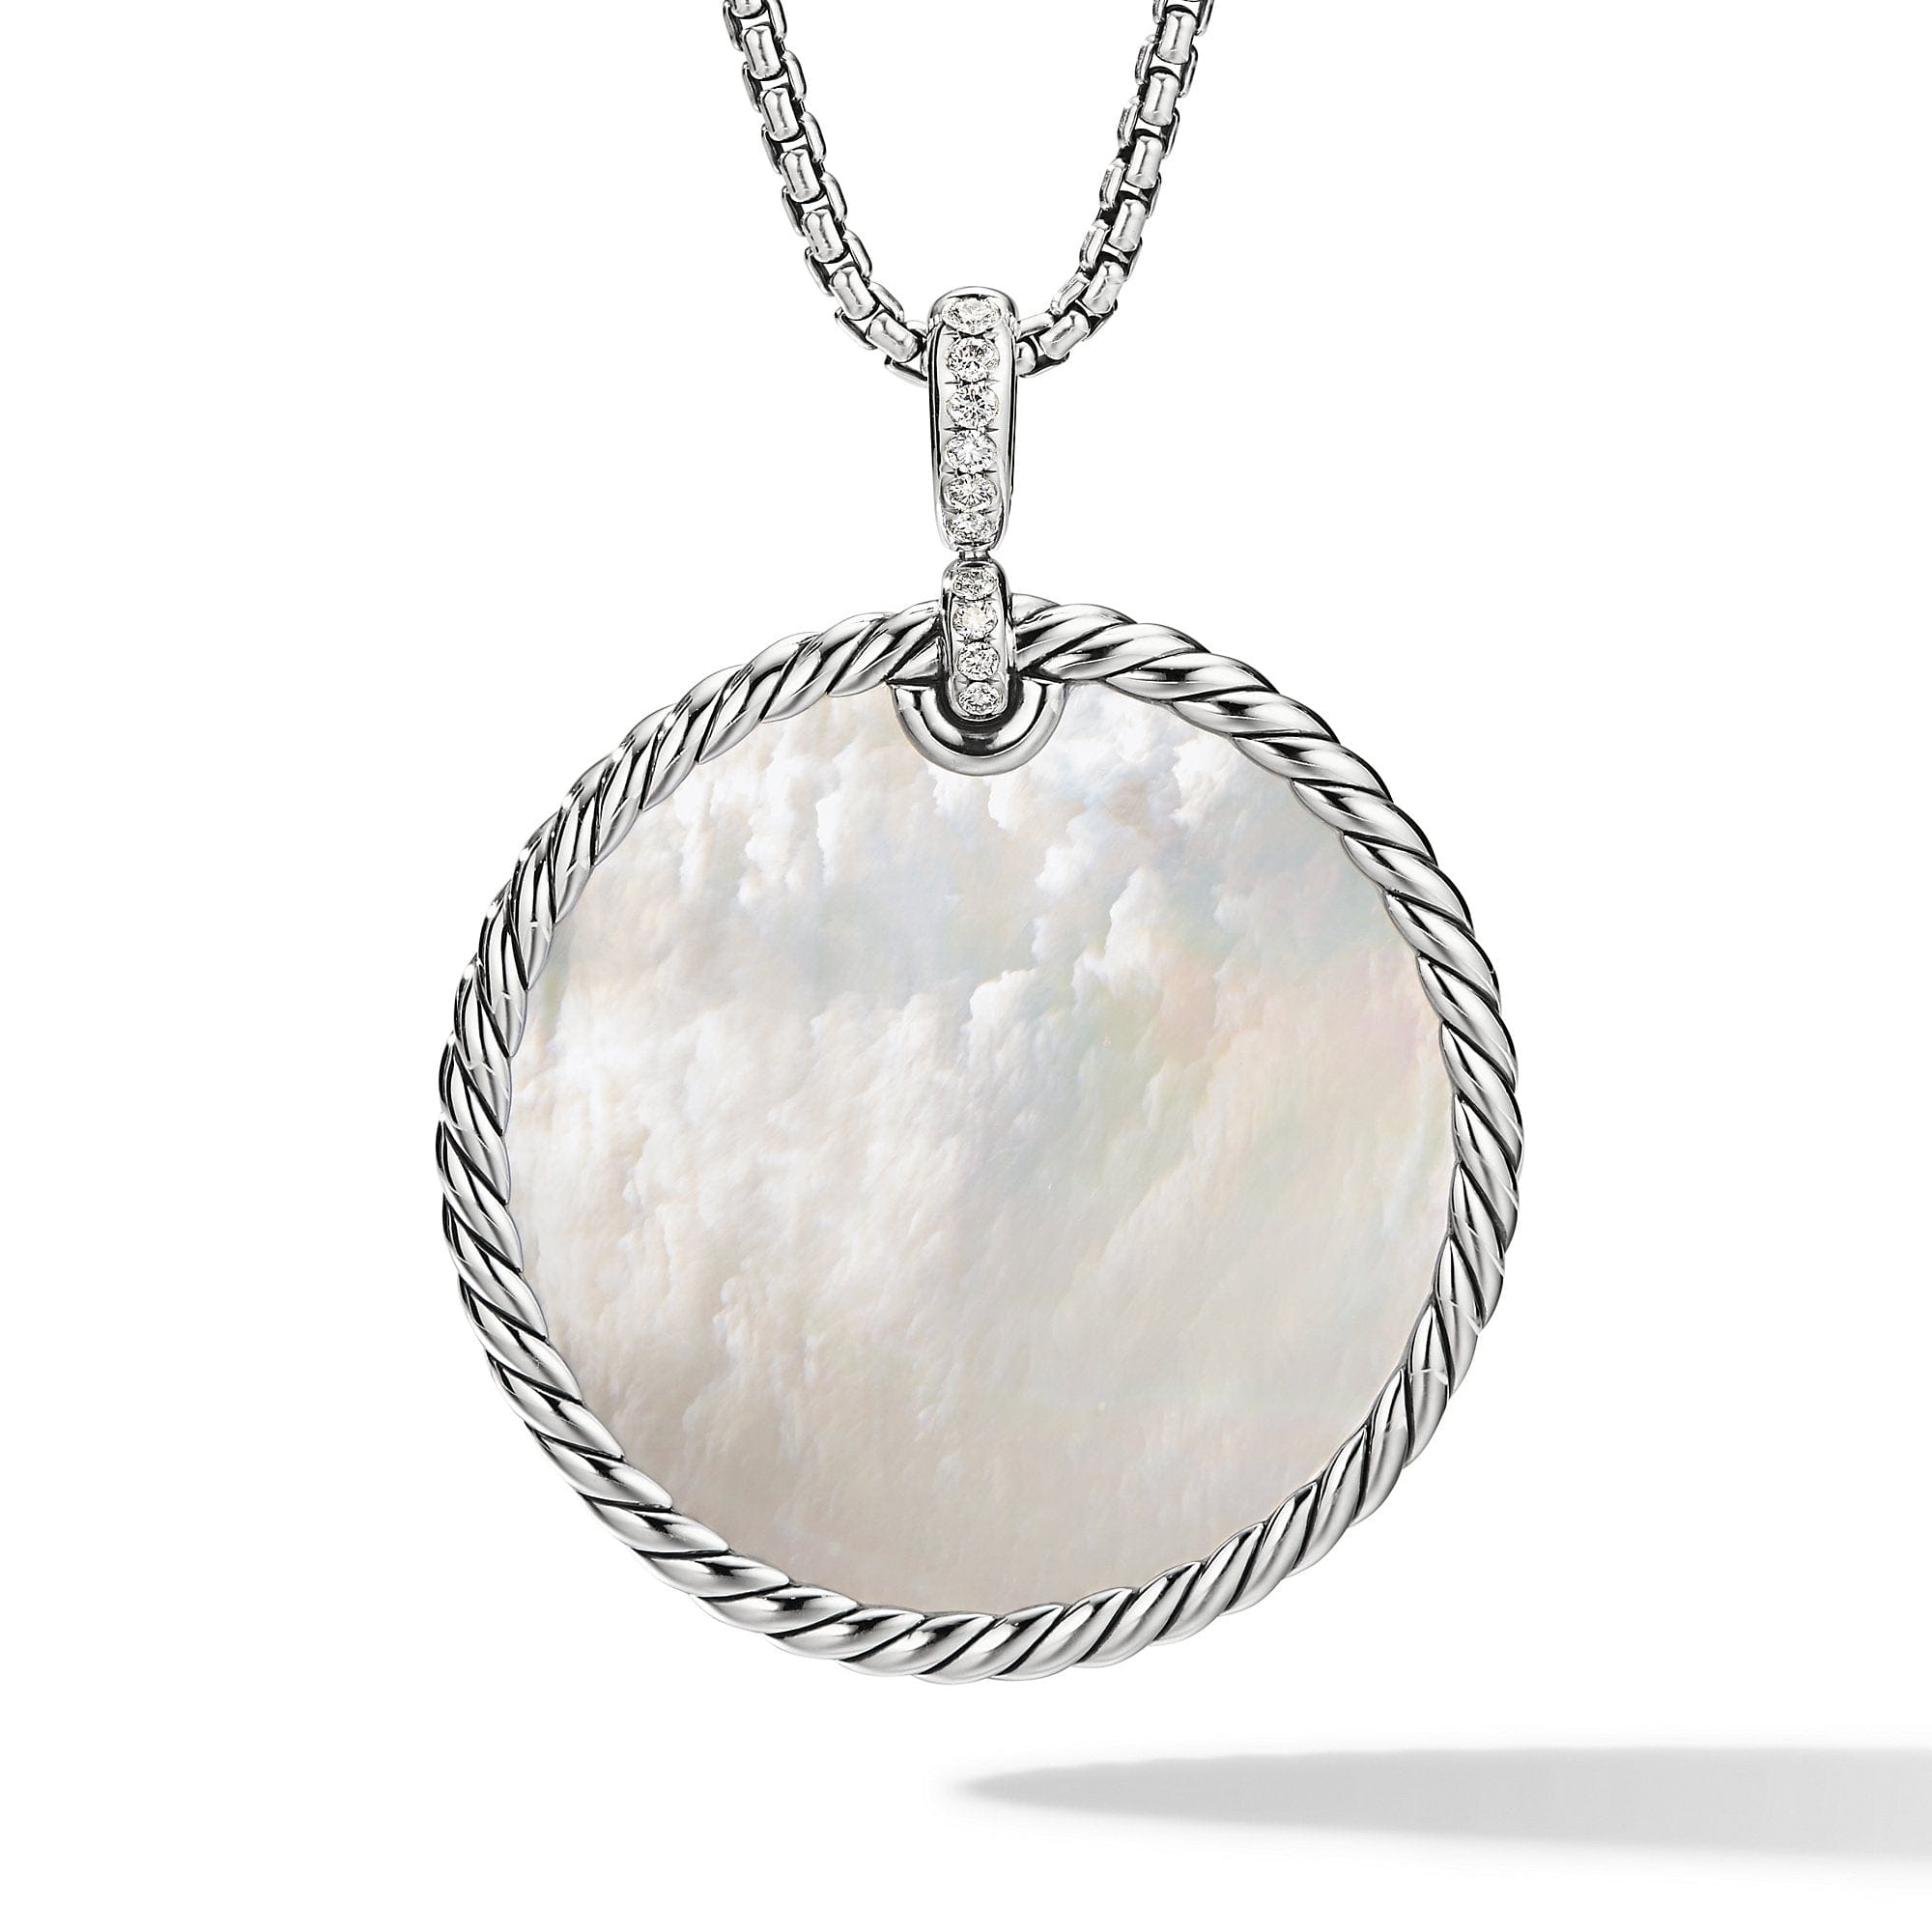 DY Elements® Reversible Disc Pendant with Black Onyx and Mother of Pearl and Pavé Diamonds